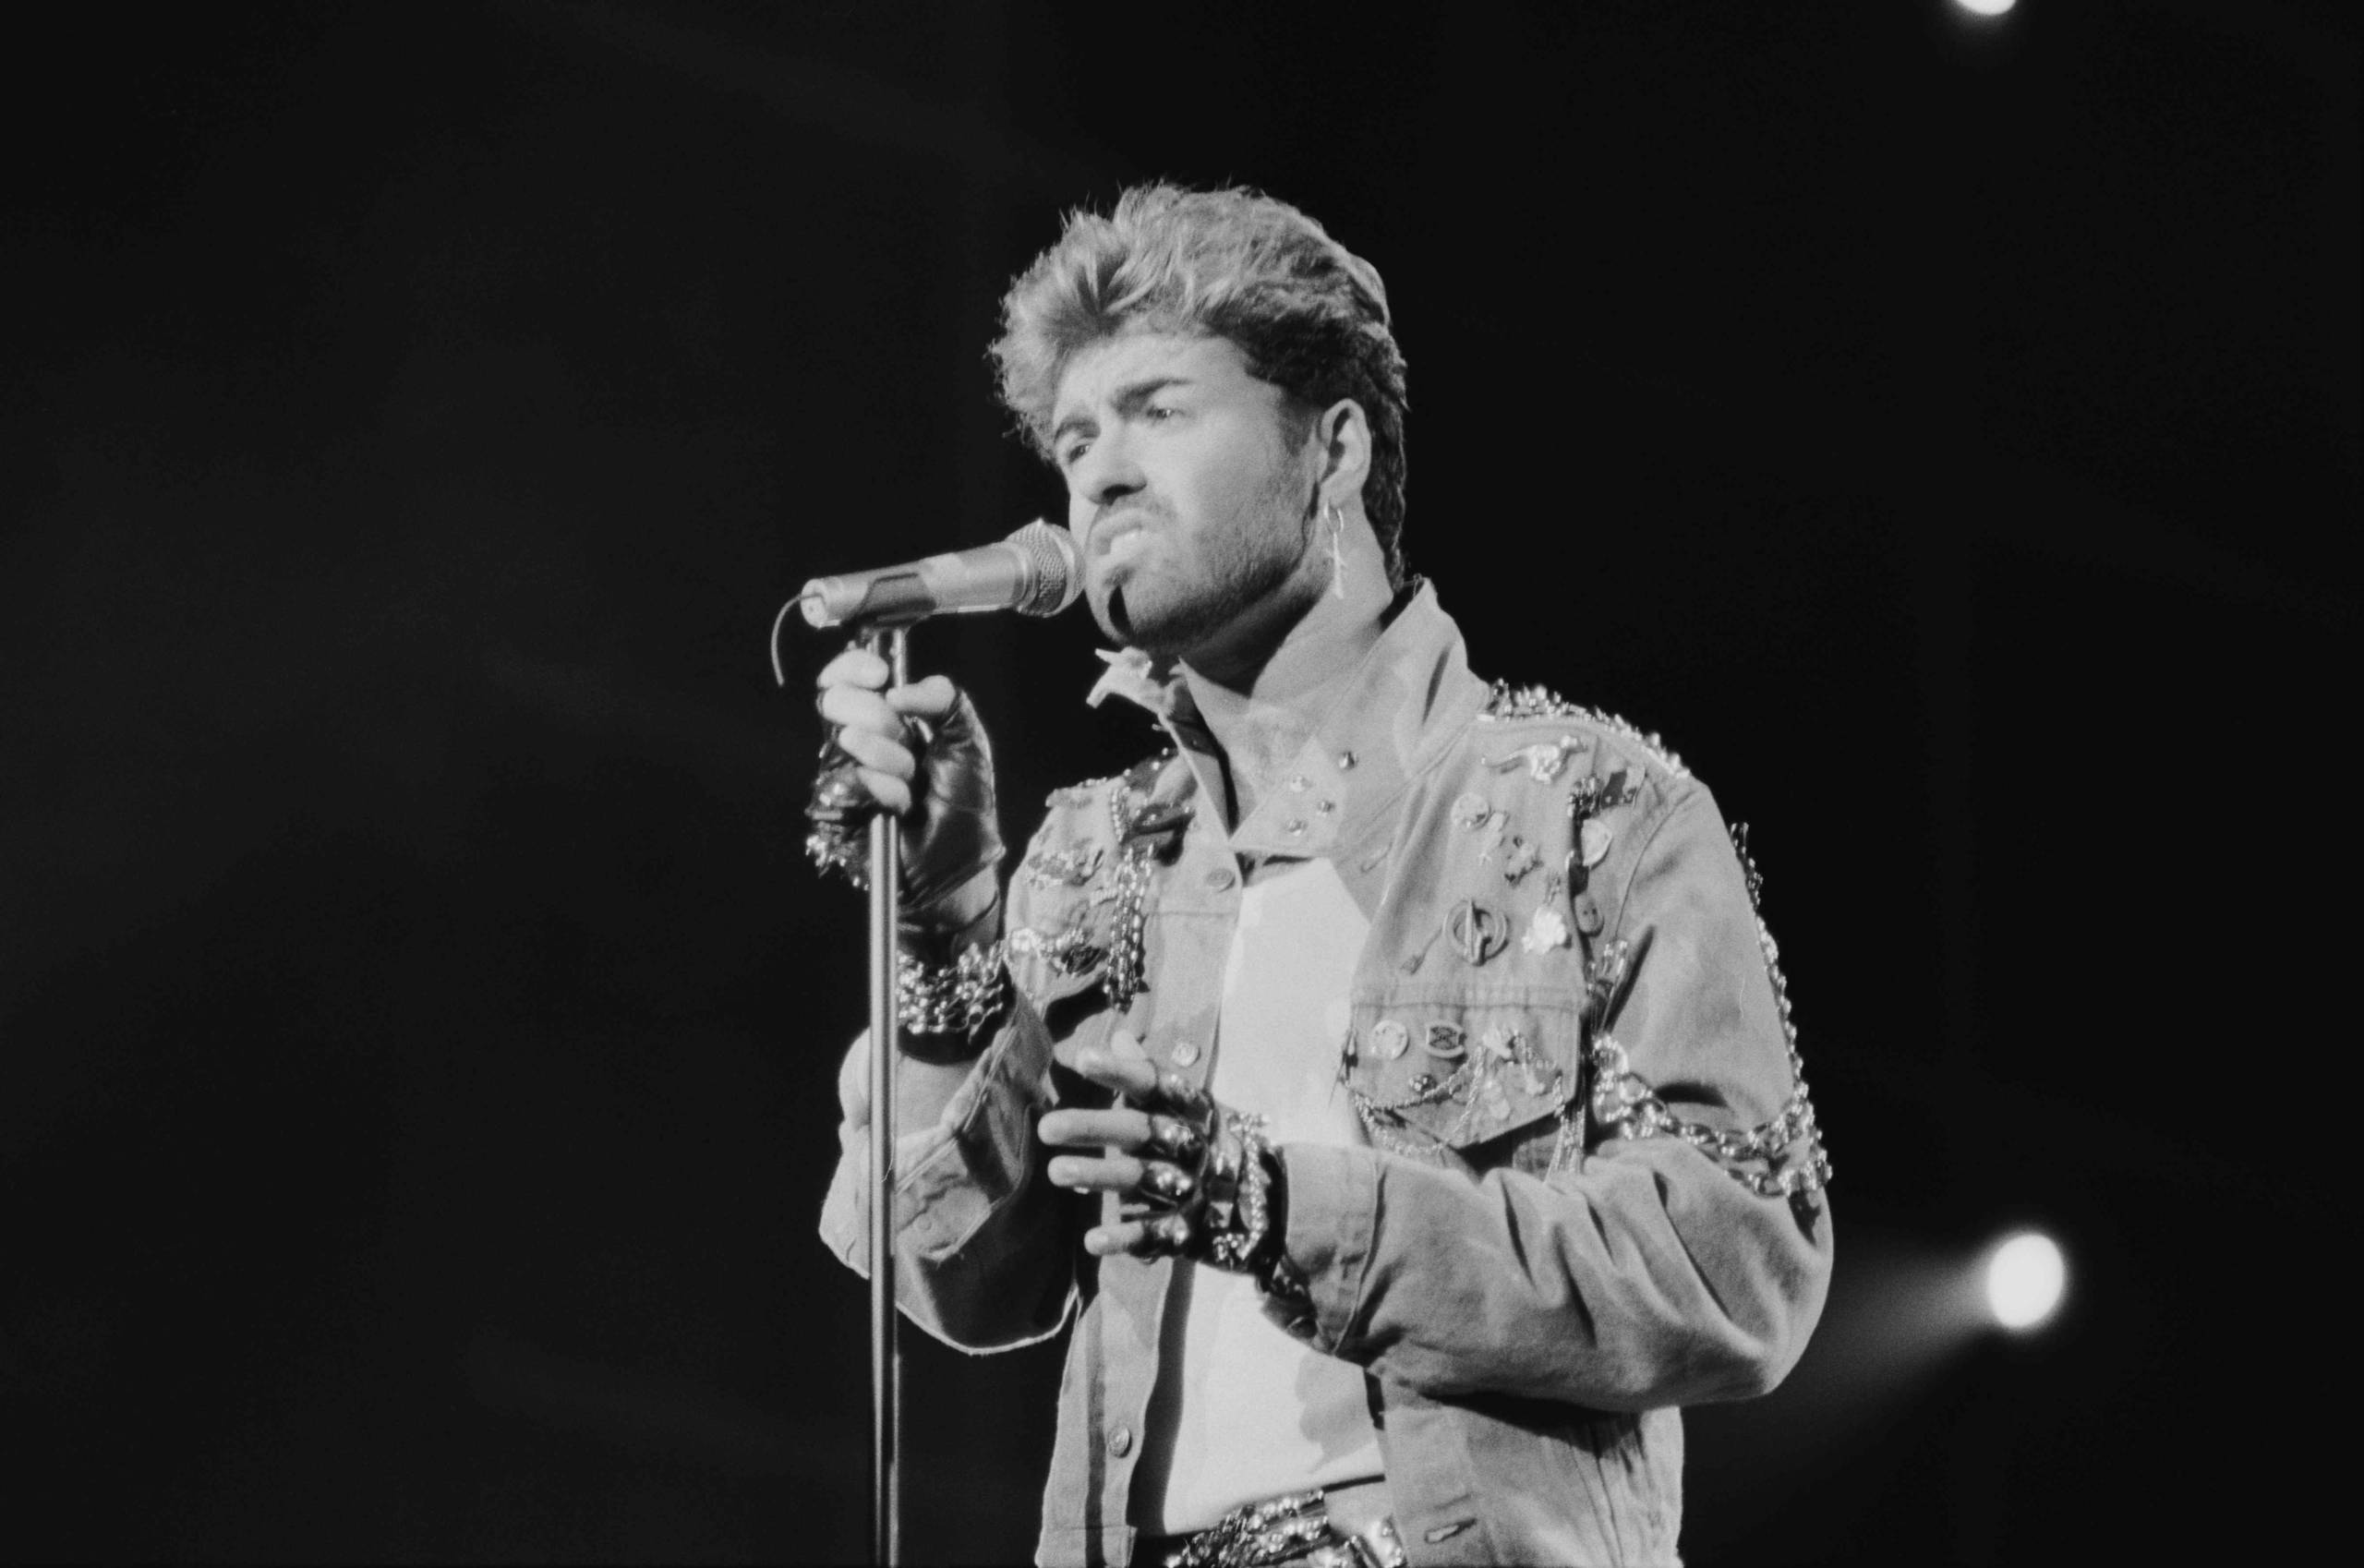 George Michael (* 25. Juni 1963 in Municipal Borough of Finchley, seit 1965 London, † 25. Dezember 2016 in Goring-on-Thames, Oxfordshire)